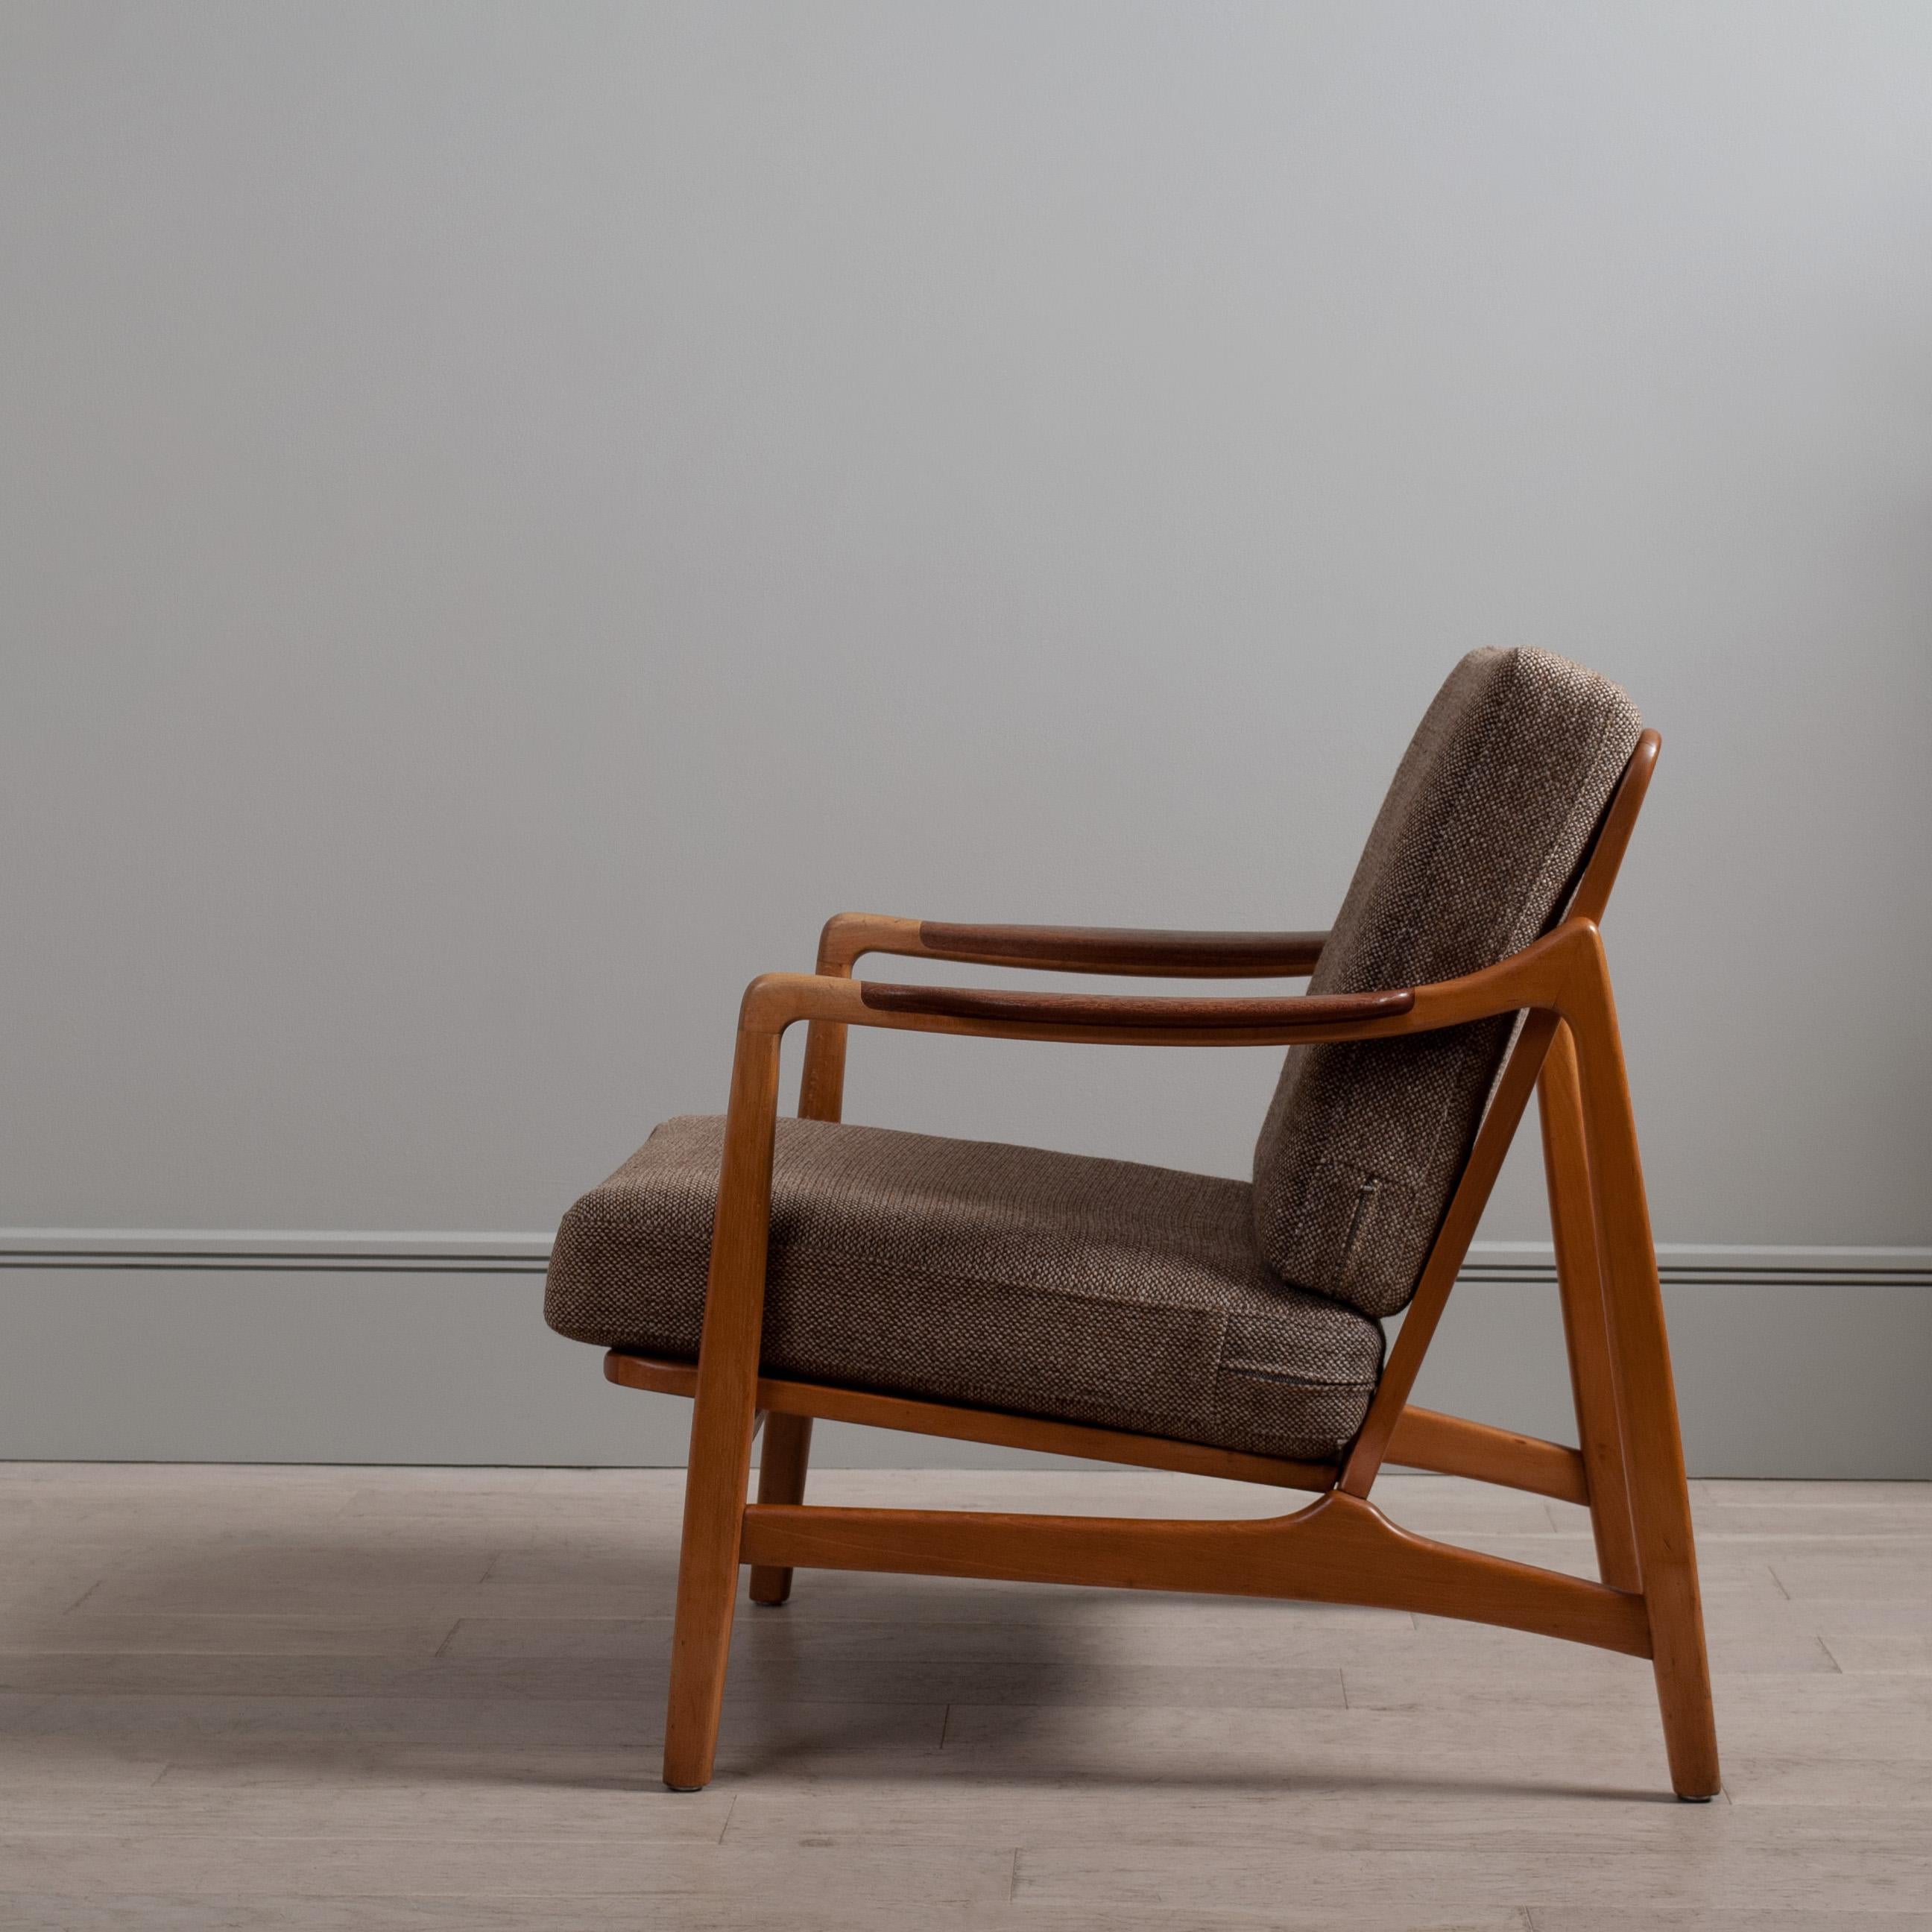 Modernist Lounge Chair, Tove & Edvard Kindt Larsen In Good Condition For Sale In London, GB